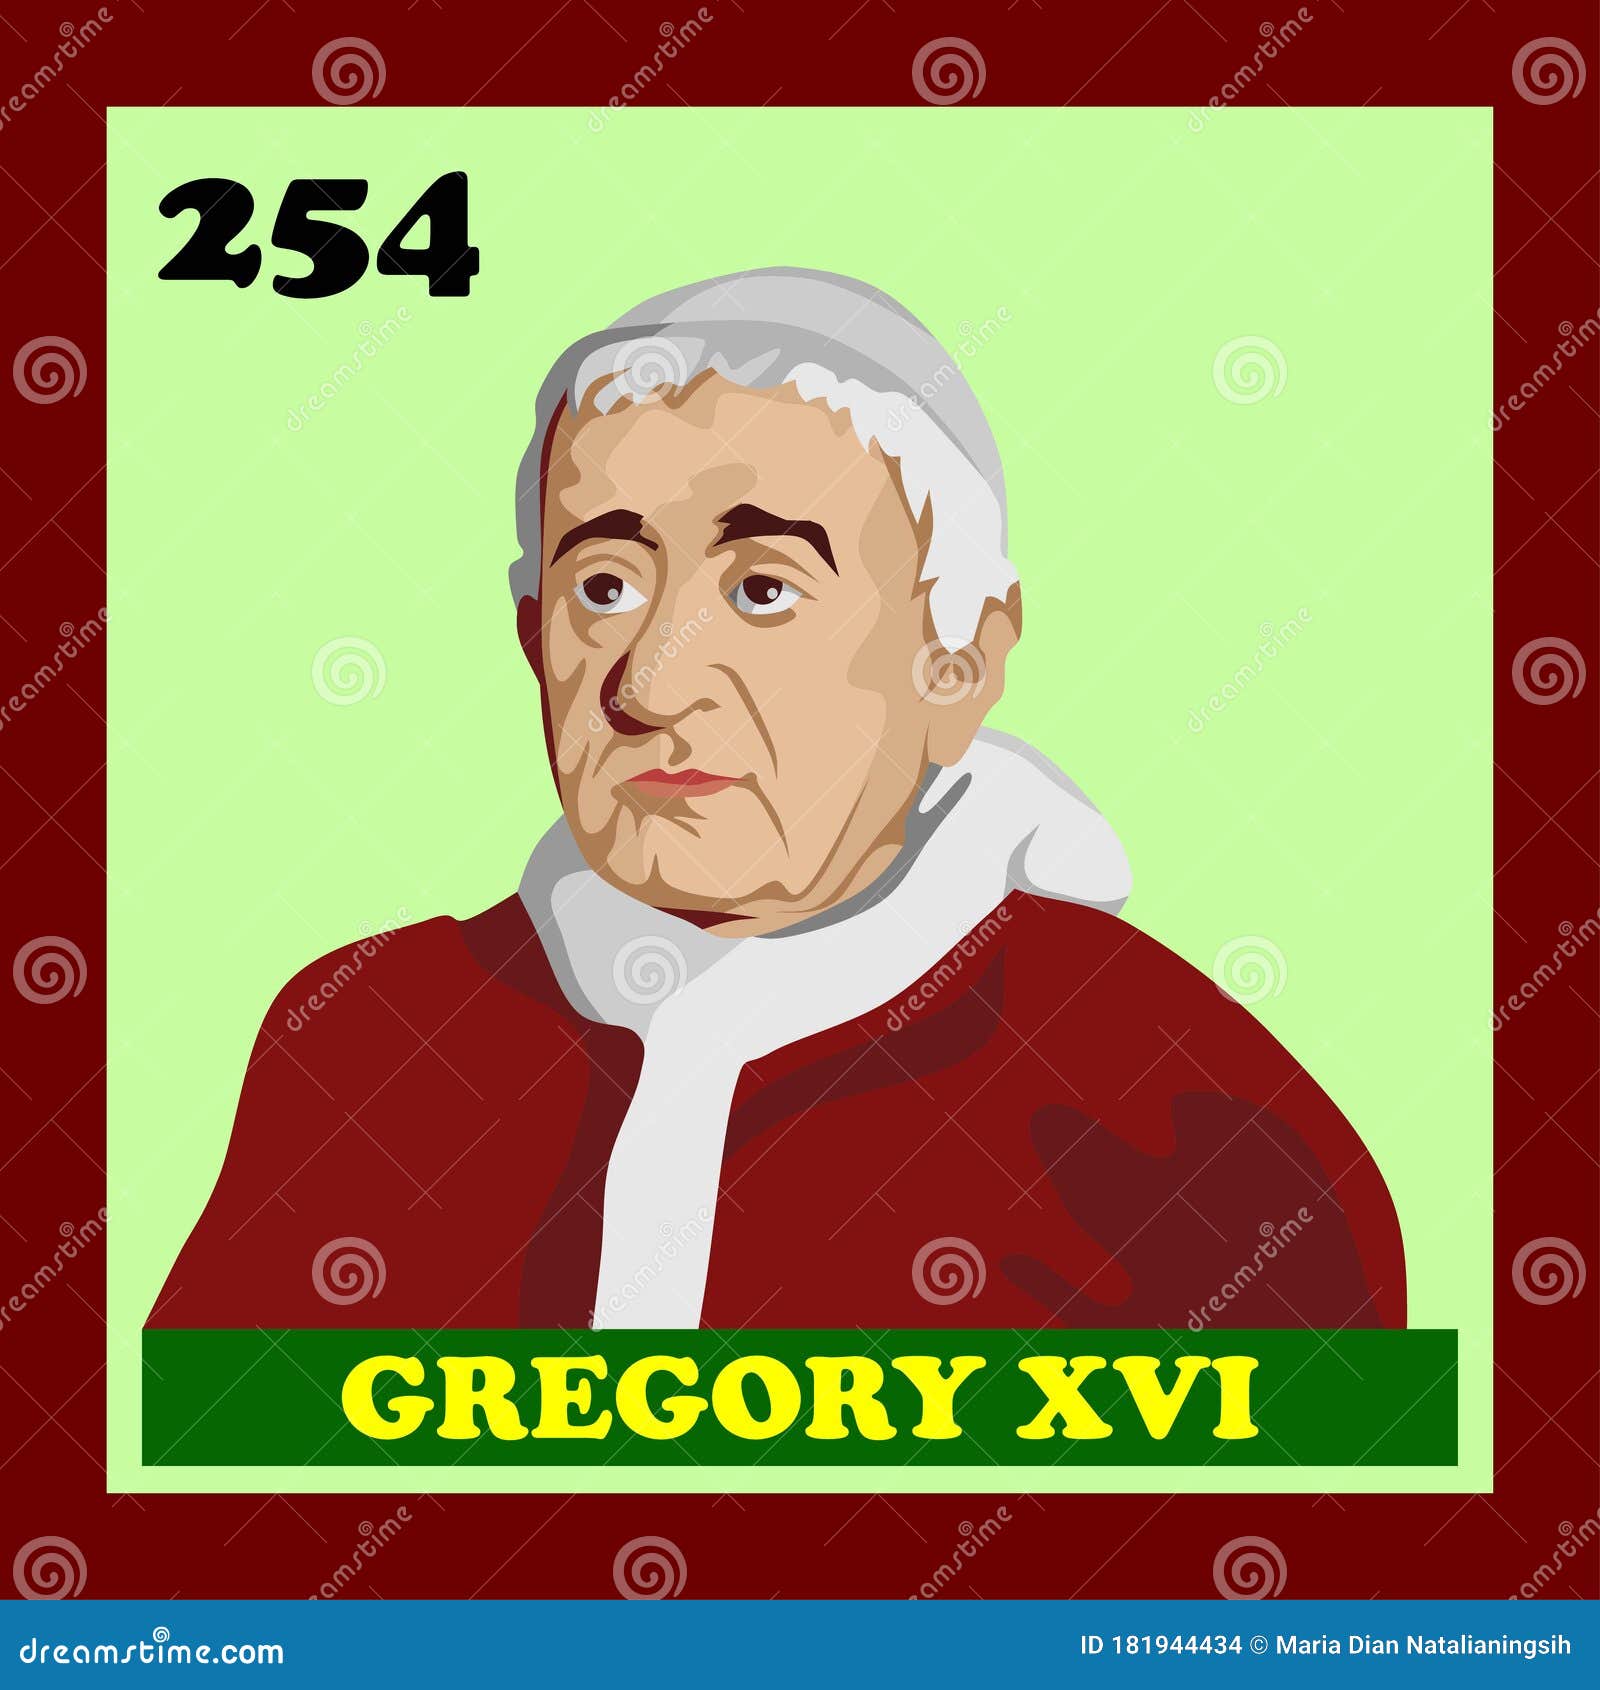 254th rome pope gregory xvi